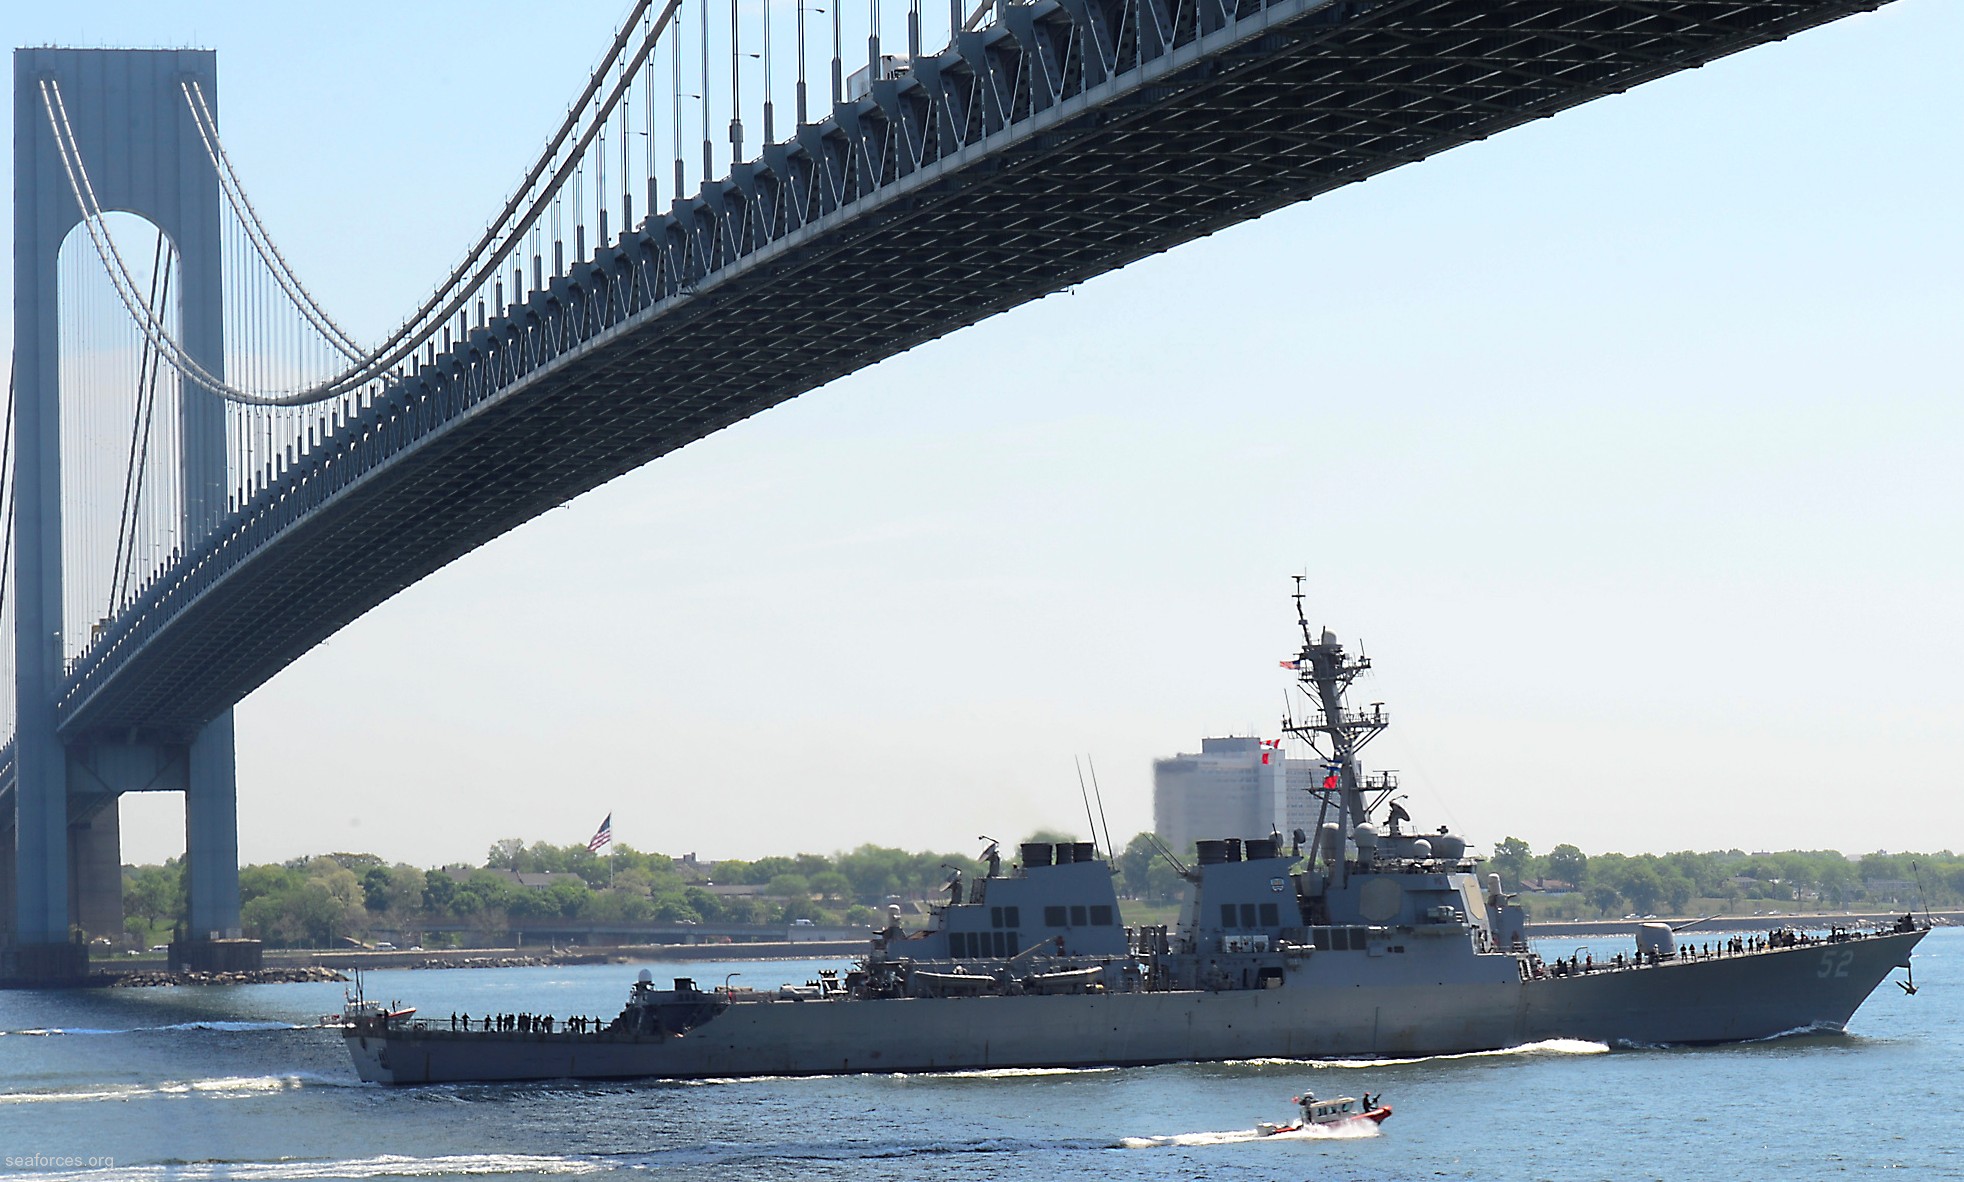 ddg-52 uss barry guided missile destroyer us navy 26 new york